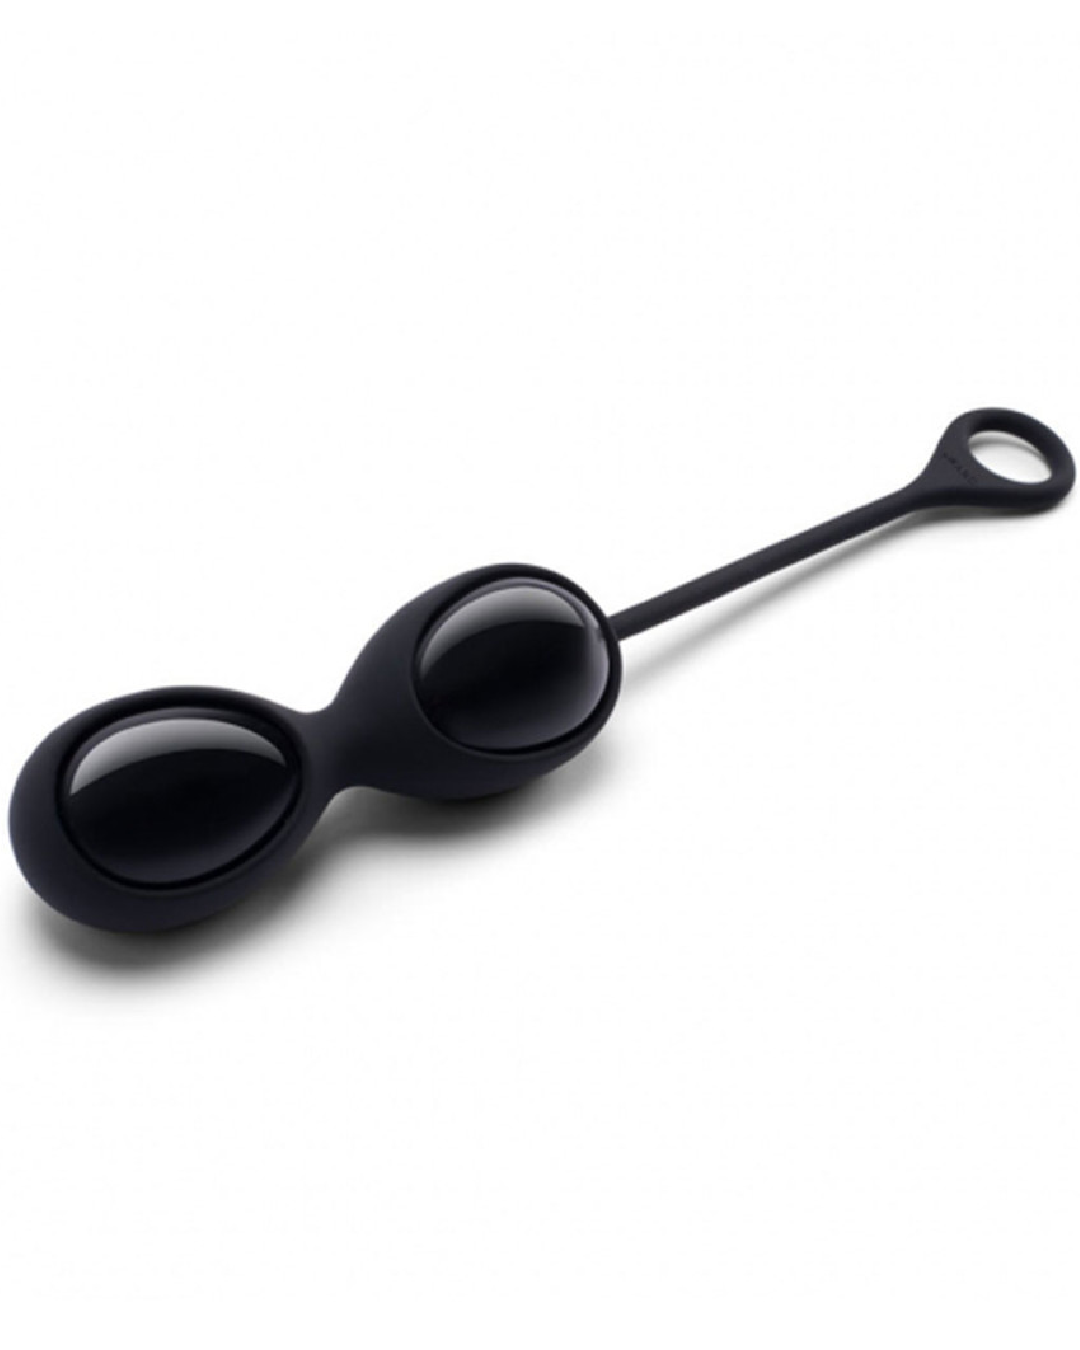 Le Wand Crystal Yoni Eggs - Black Obsidian in silicone case with loop handle 